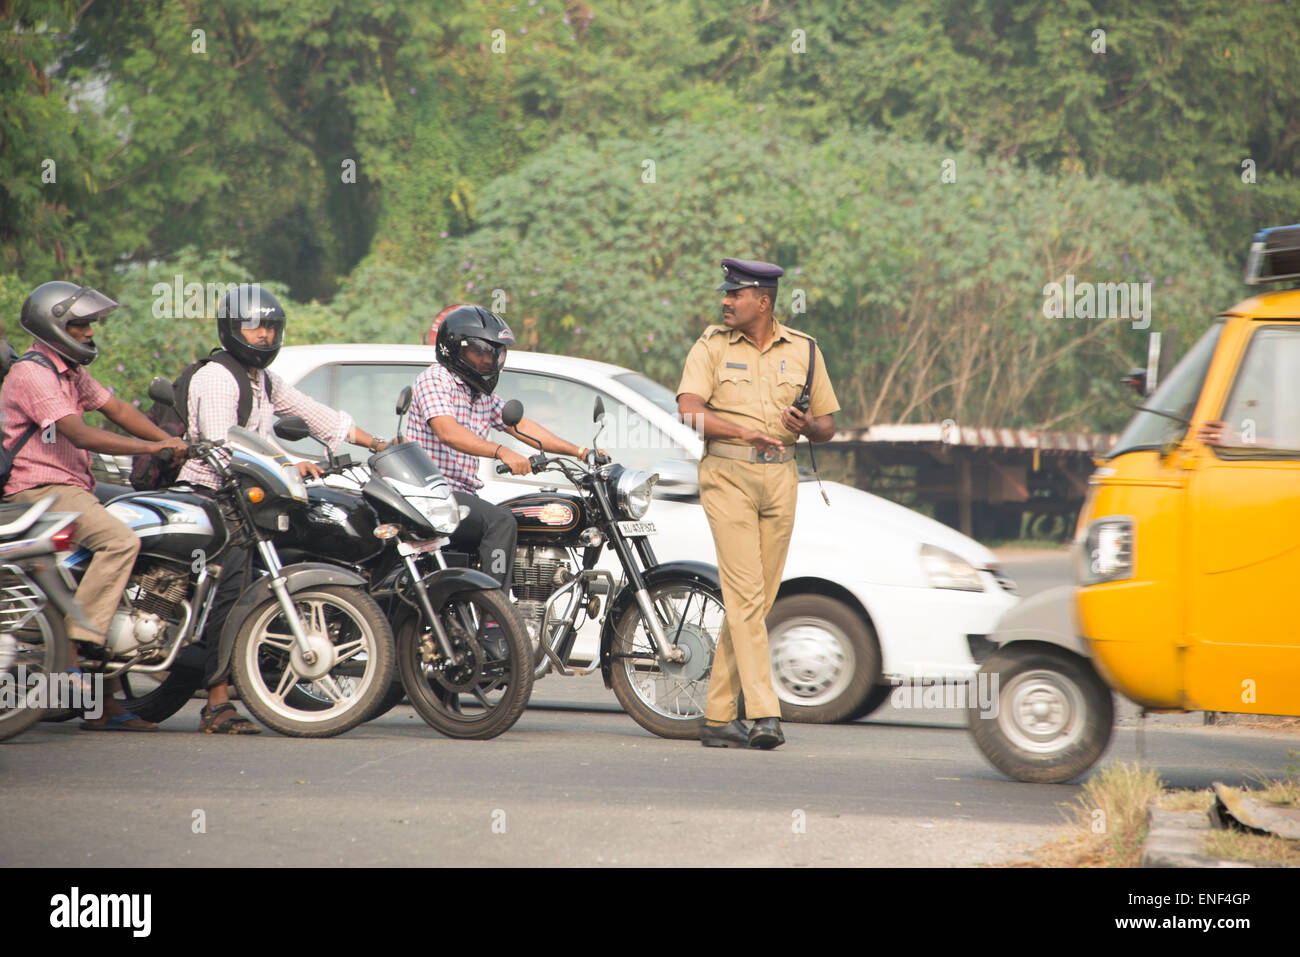 A traffic Police officer trying his best to control the flow of disorganised traffic at a busy cross-road in c Stock Photo